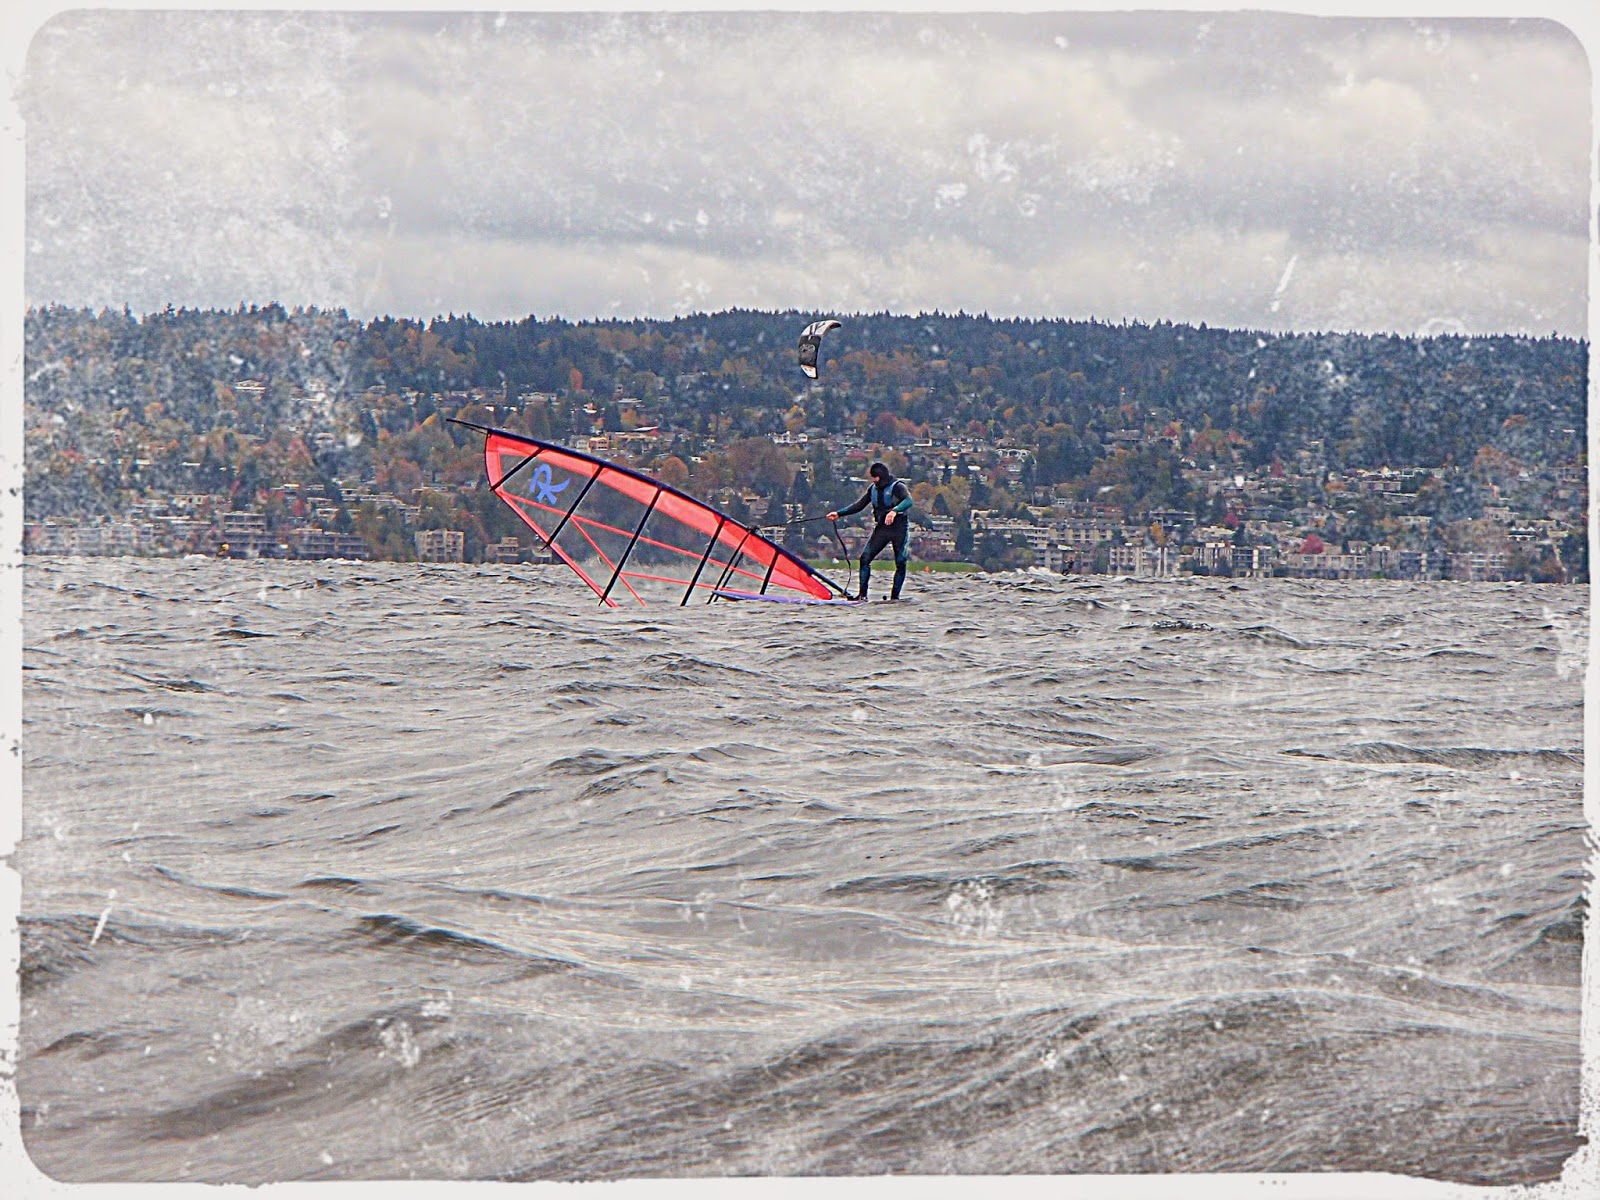 Windsurfing at Magnuson Park in Seattle